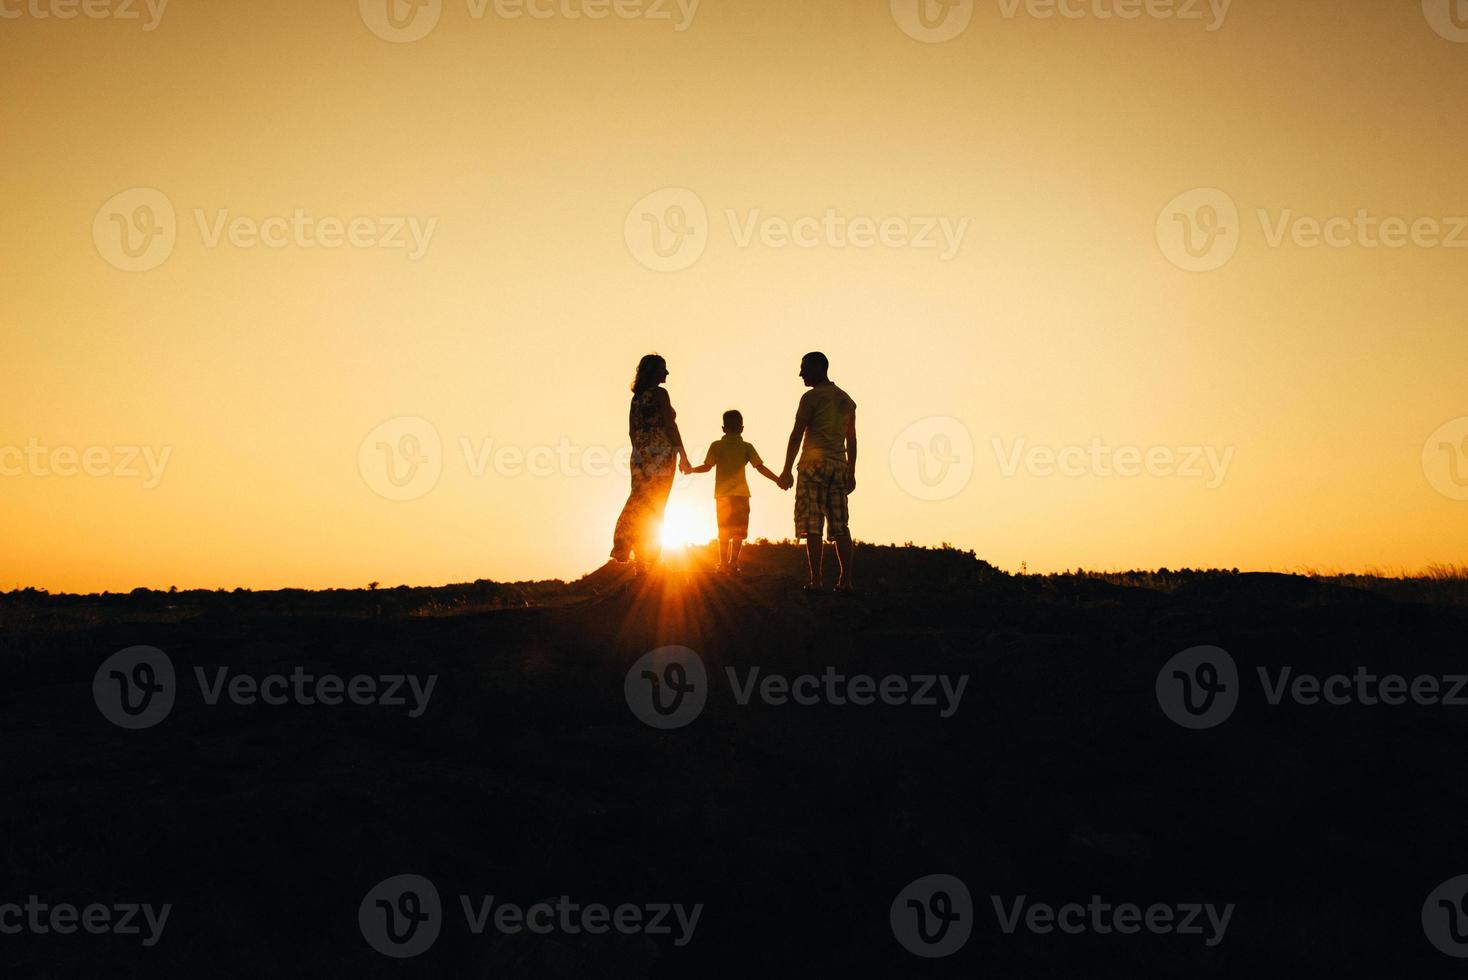 silhouettes of a happy young happy family against an orange sunset photo